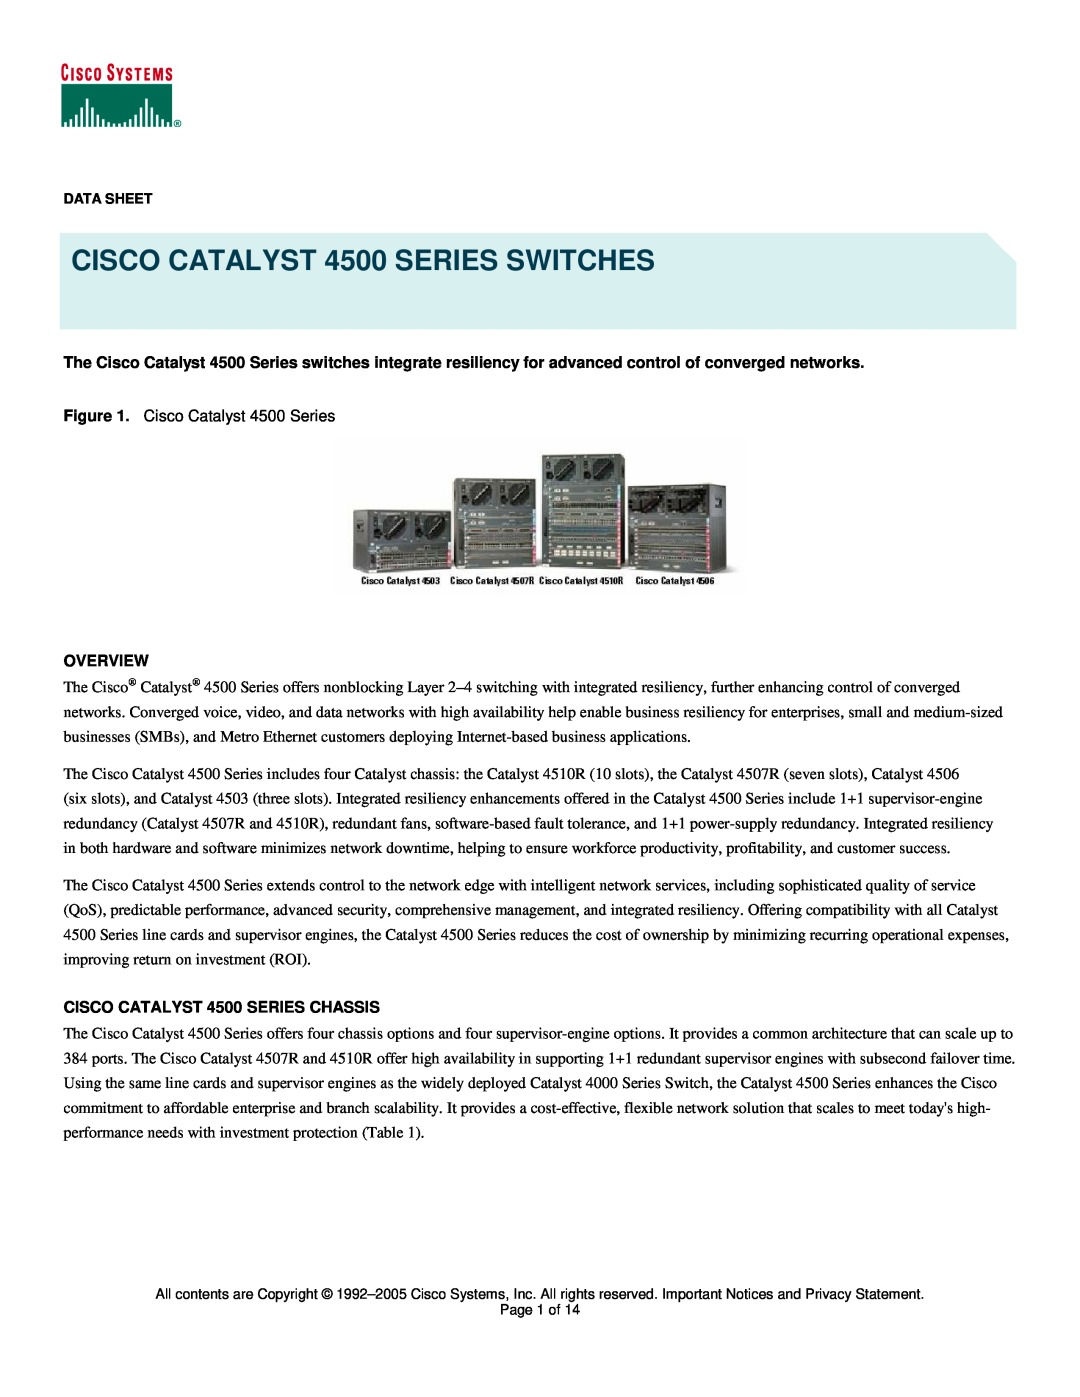 Cisco Systems manual Overview, CISCO CATALYST 4500 SERIES CHASSIS, CISCO CATALYST 4500 SERIES SWITCHES 